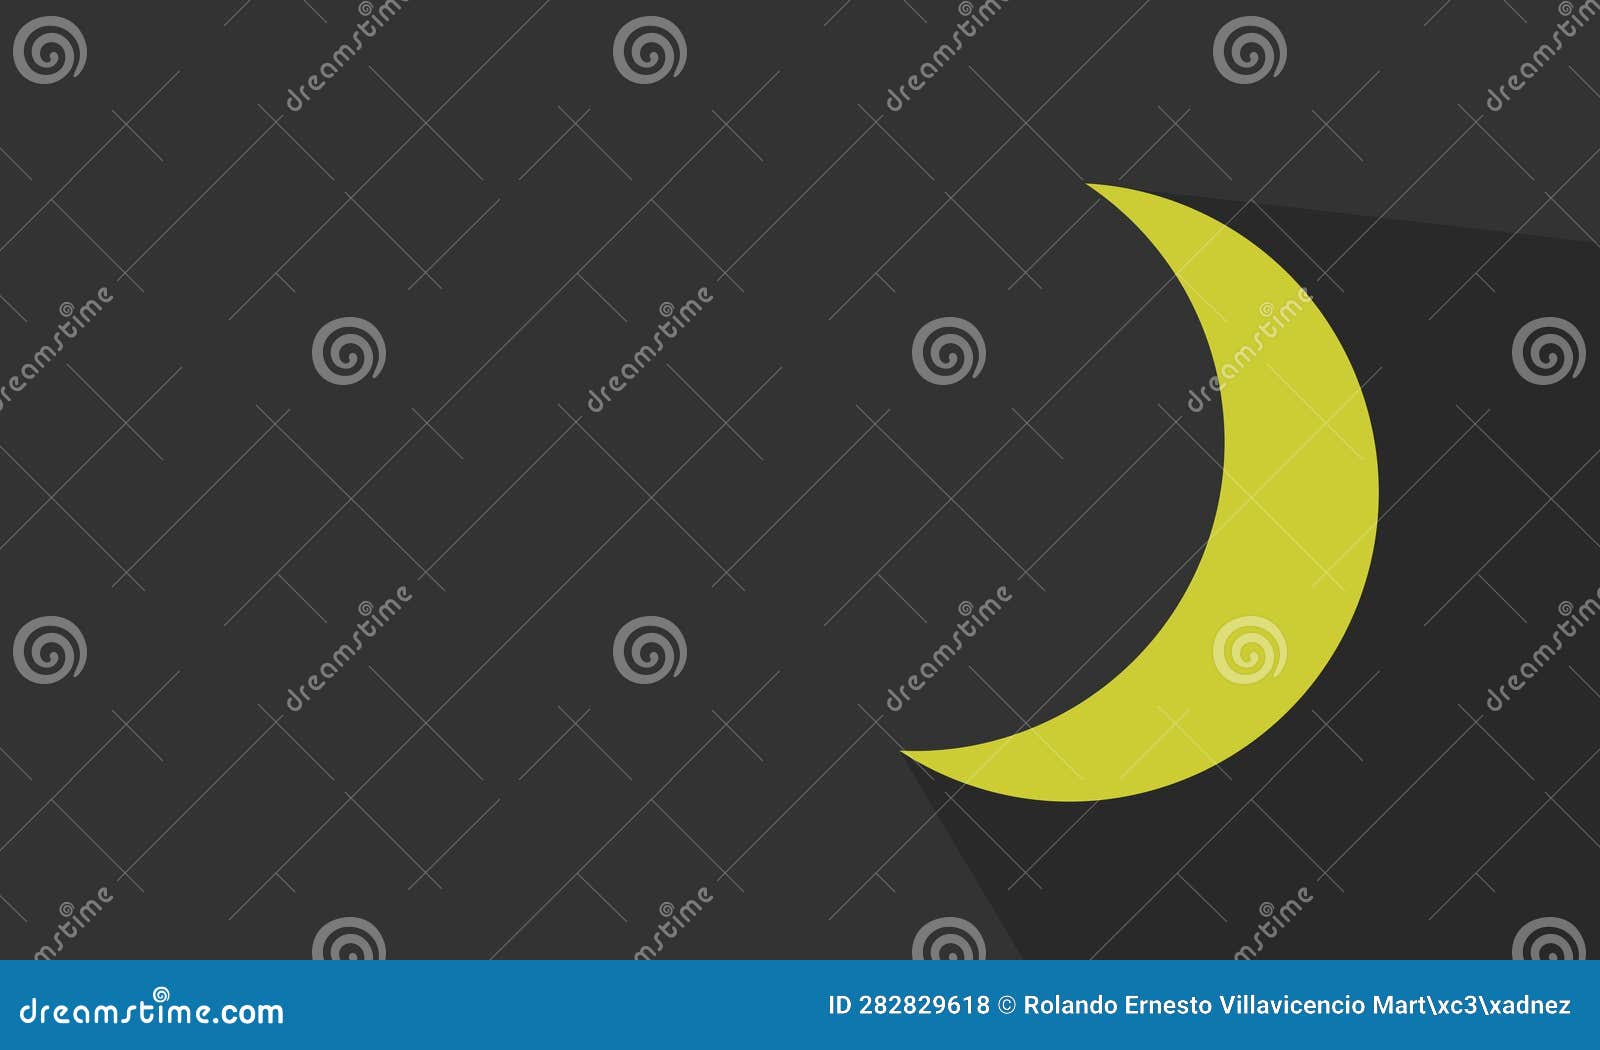  for wallpaper and presentations of a half moon.